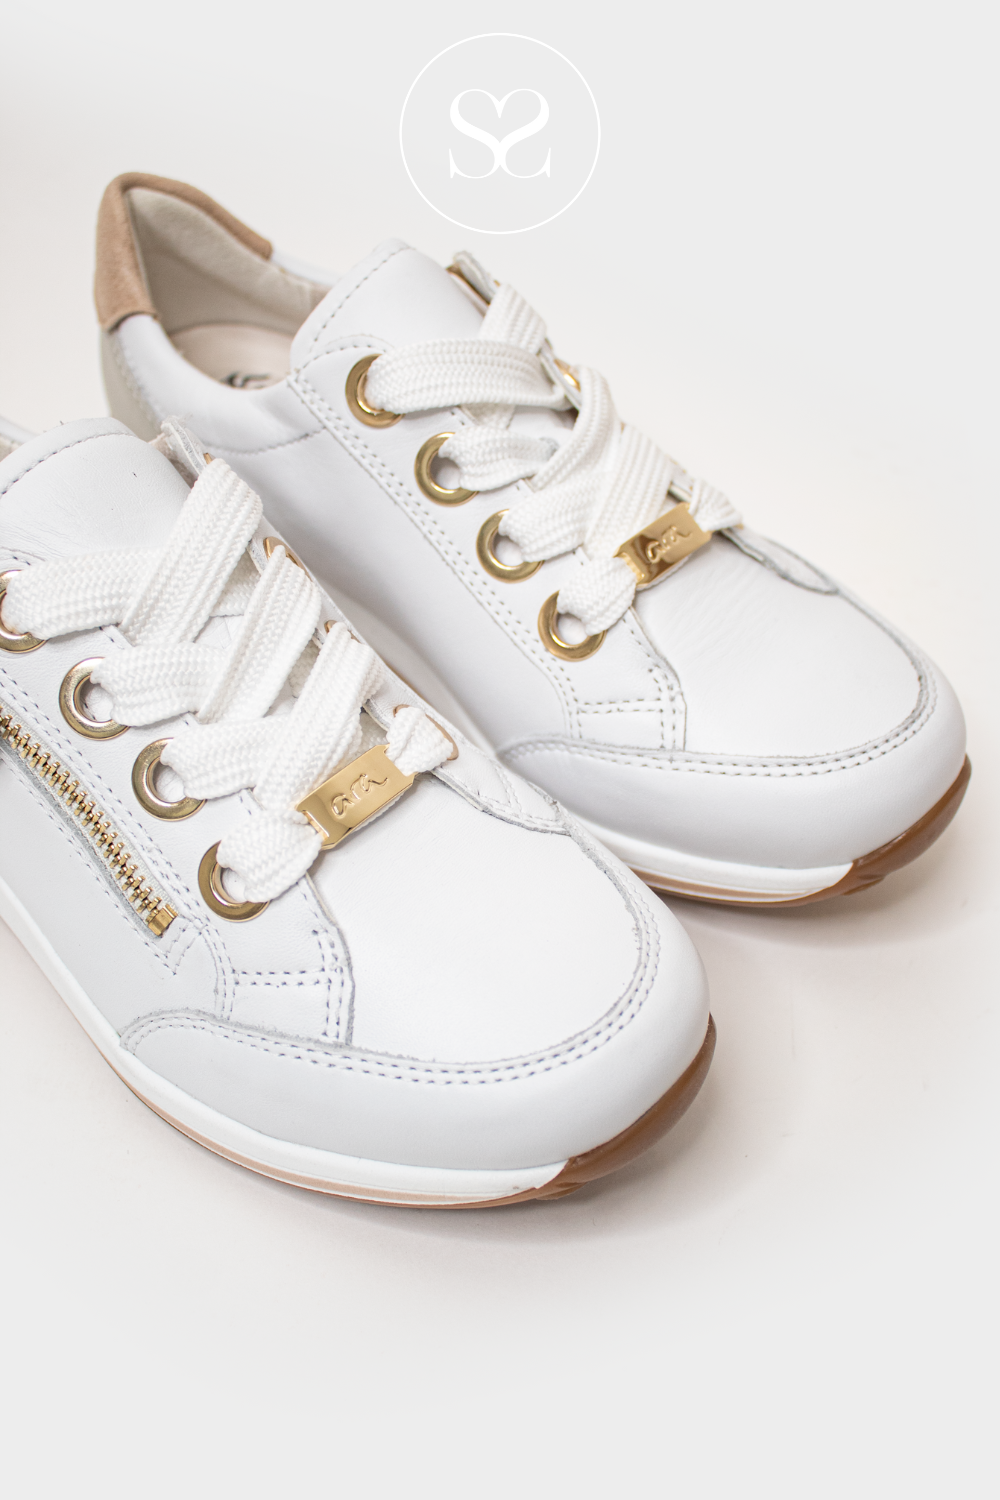 ARA 12_34587_79 WHITE LEATHER TRAINERS WITH SILVER HEEL, LACES AND SIDE ZIP